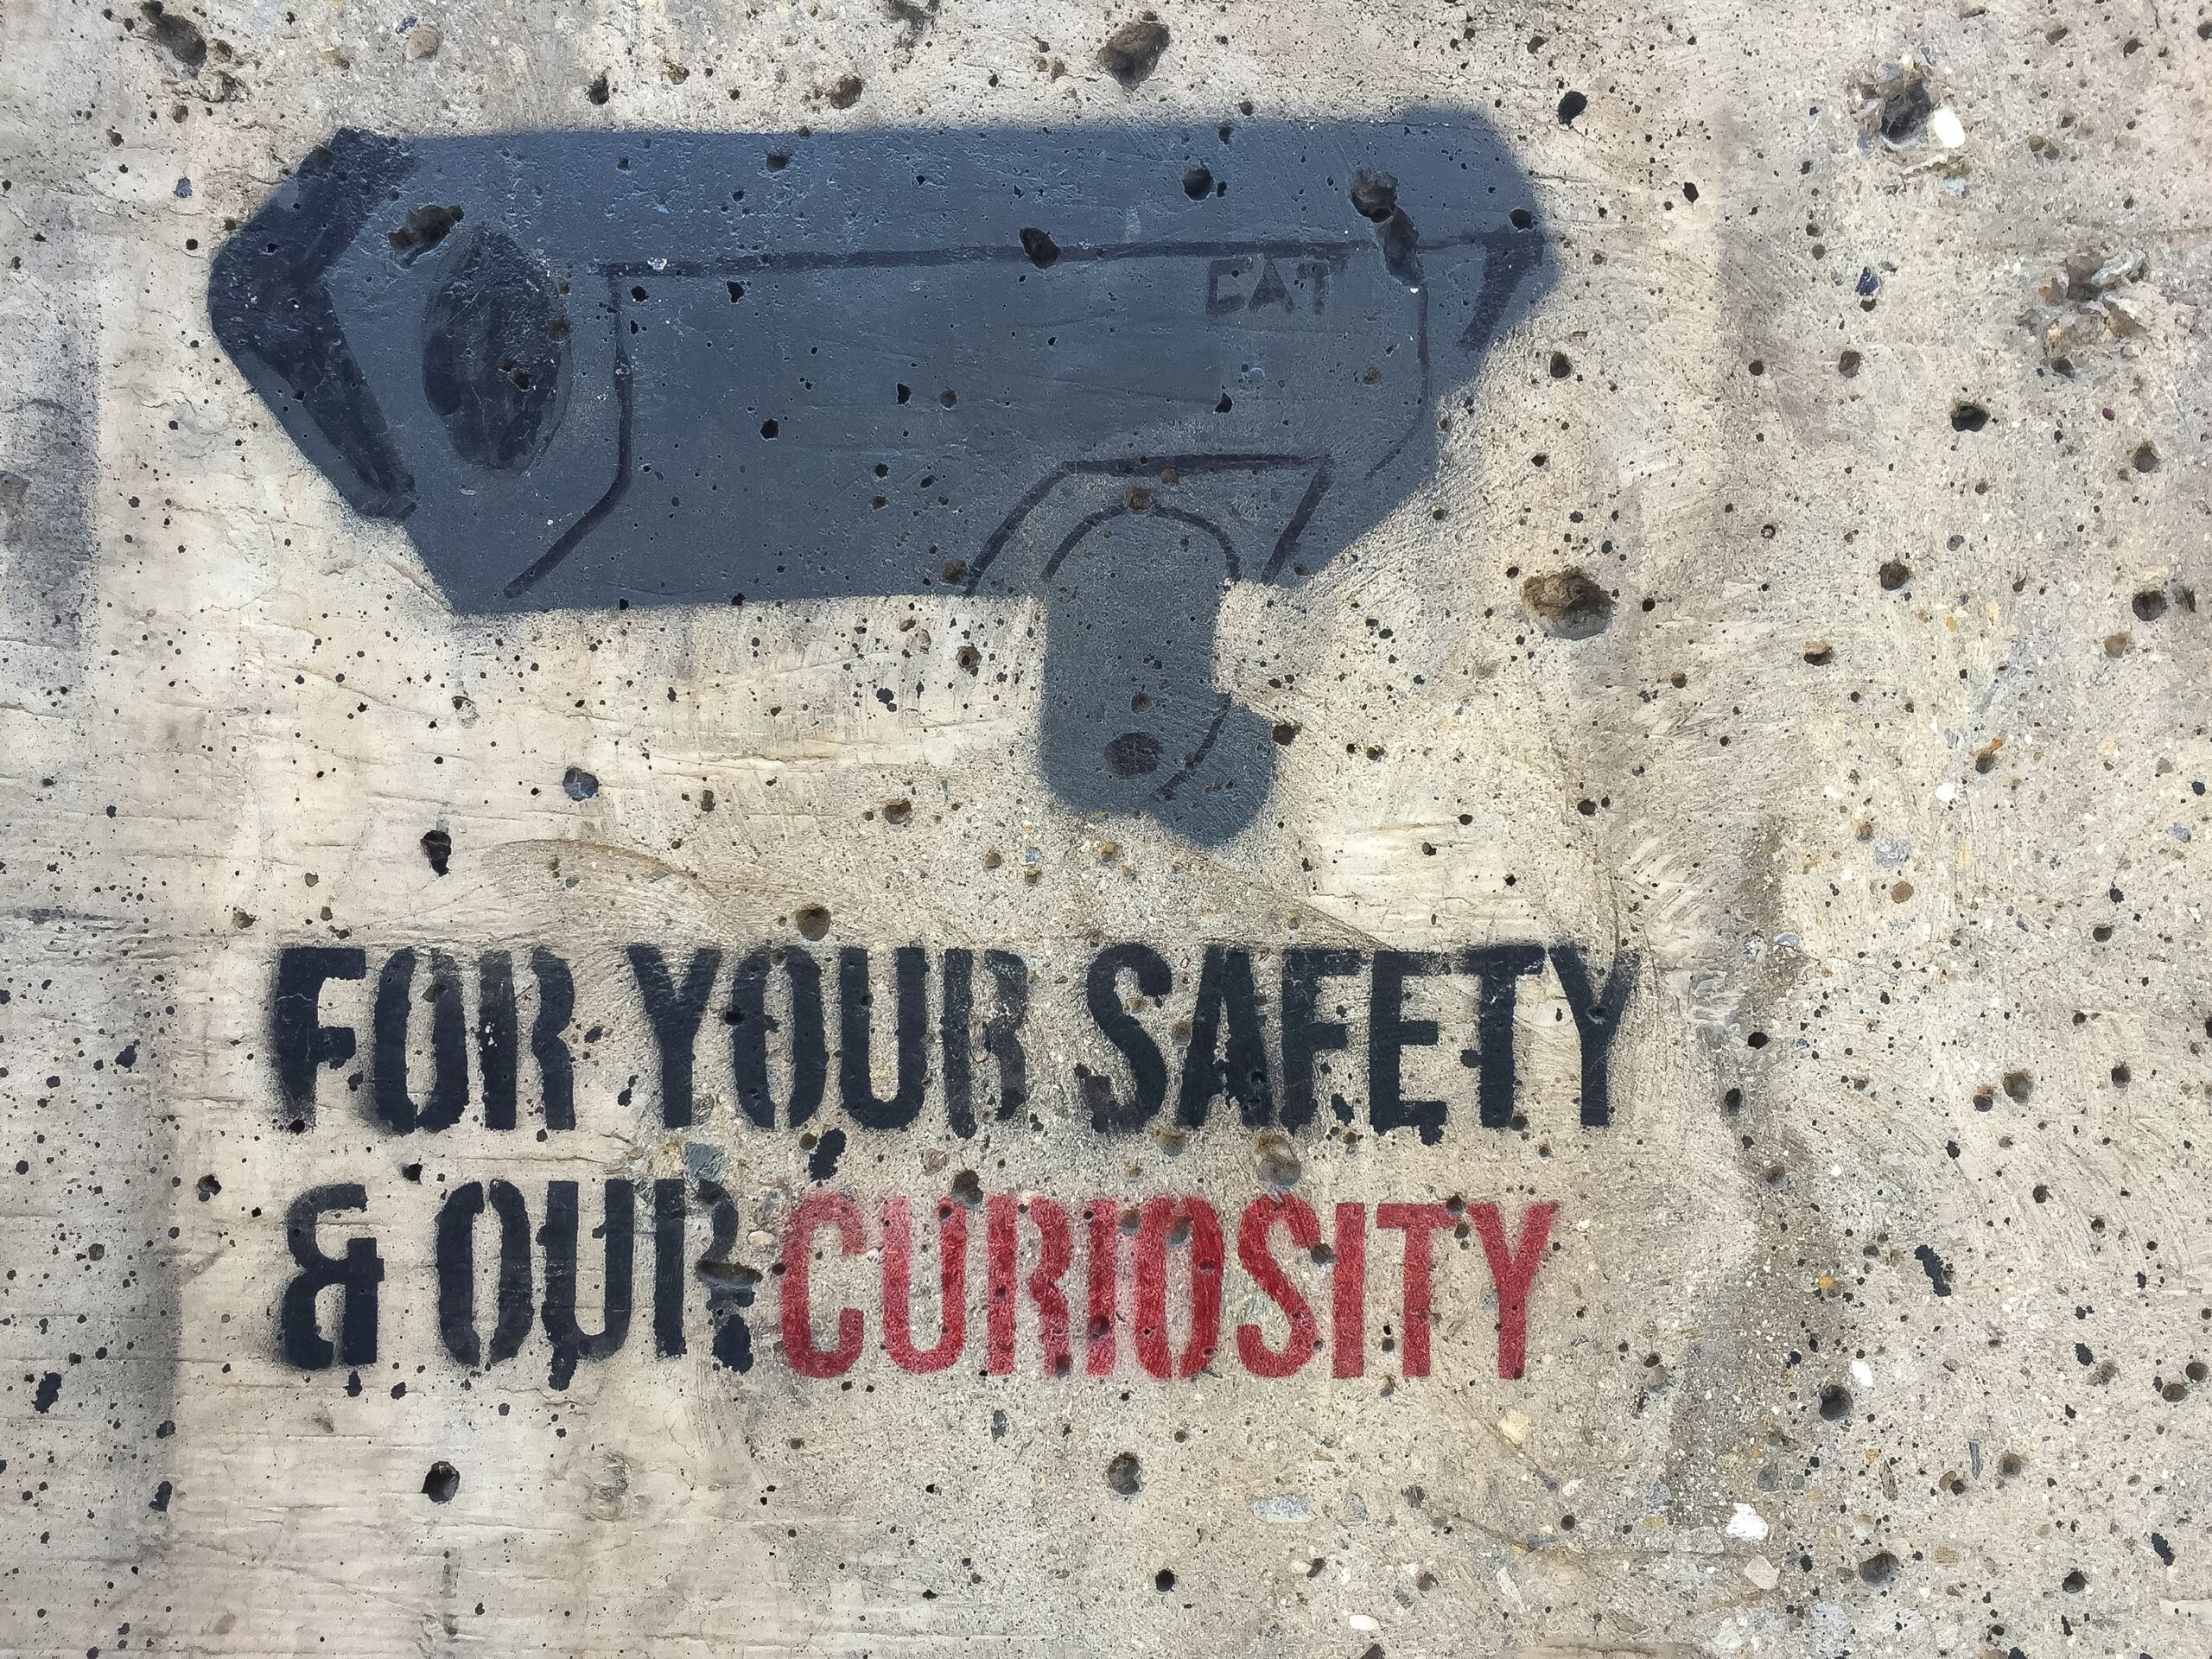 For your safety and our curiosity